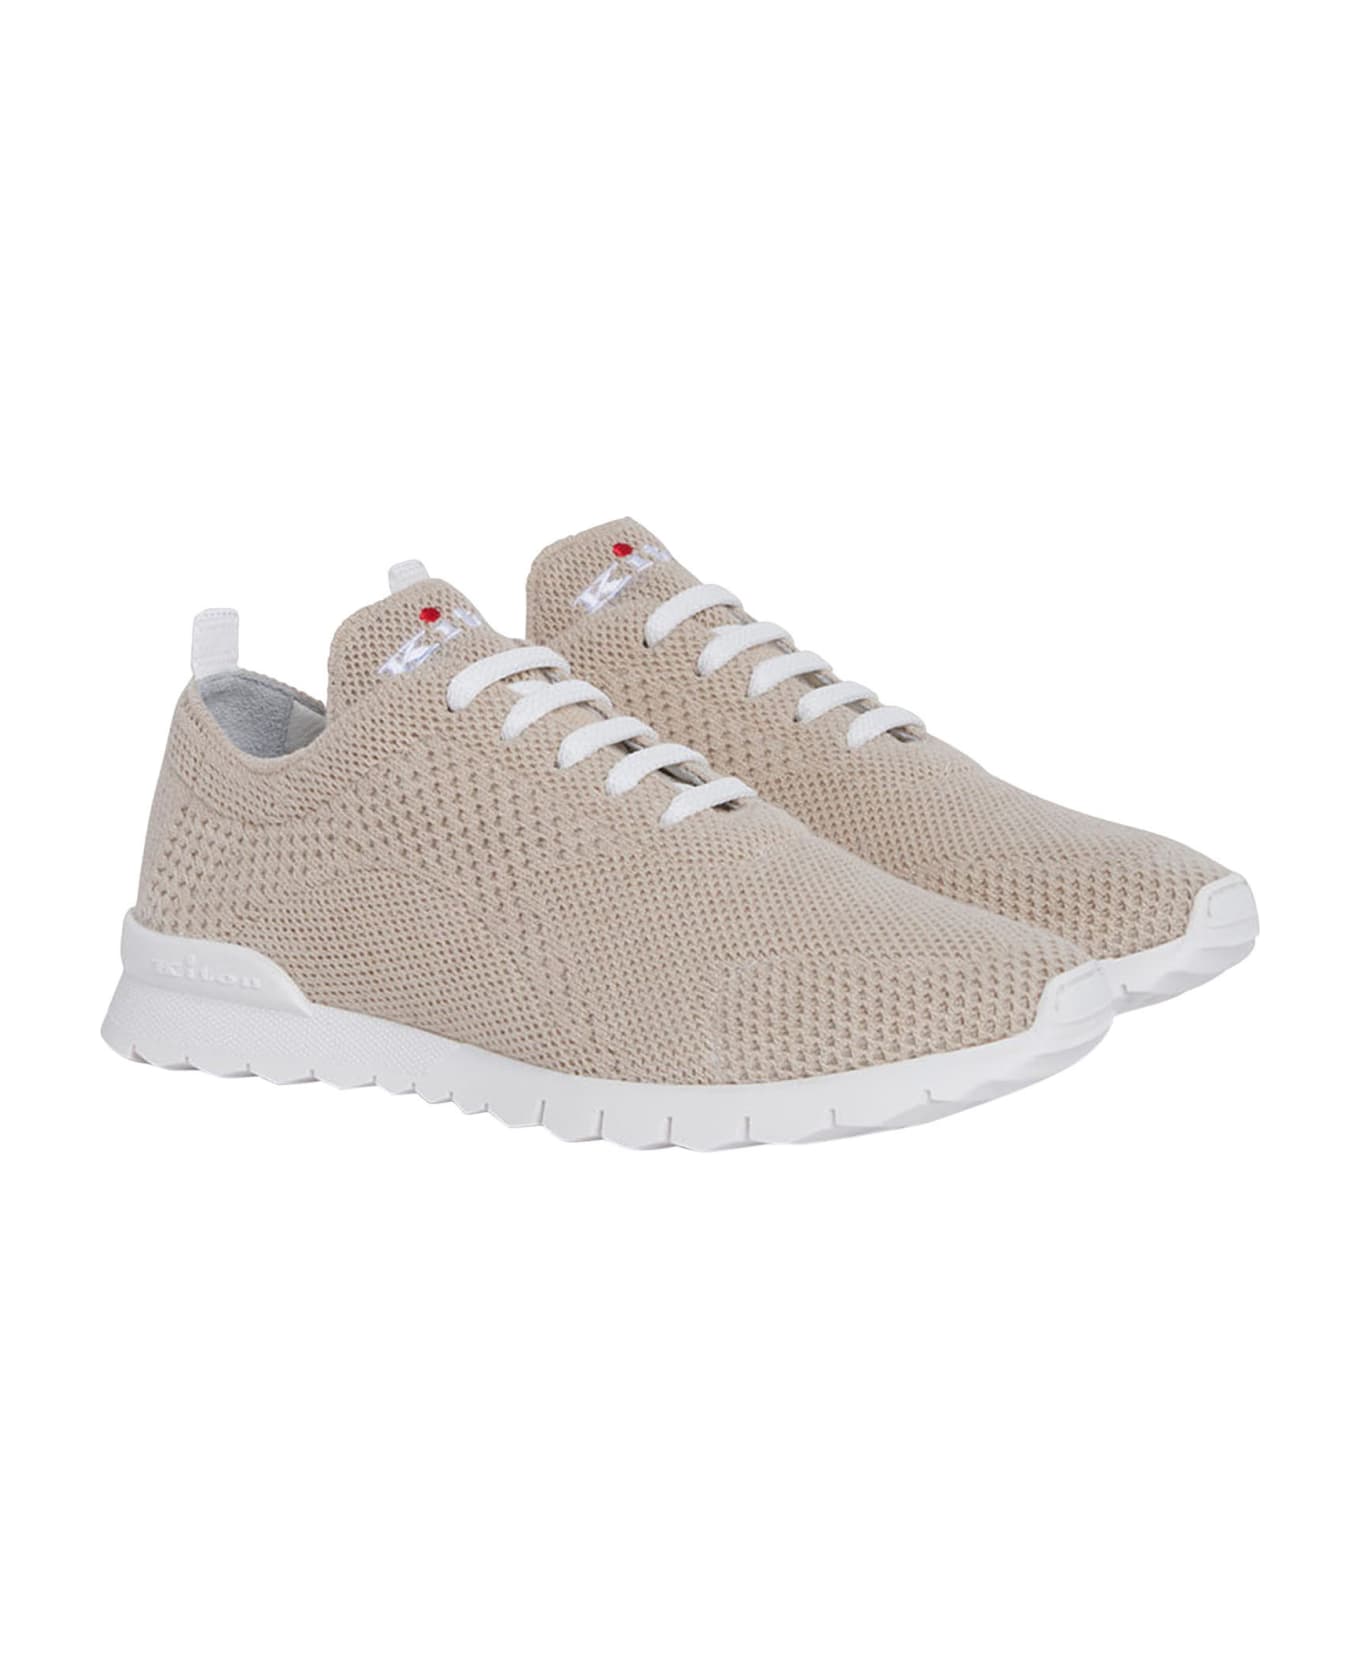 Kiton Sneakers Shoes Cashmere - BEIGE スニーカー